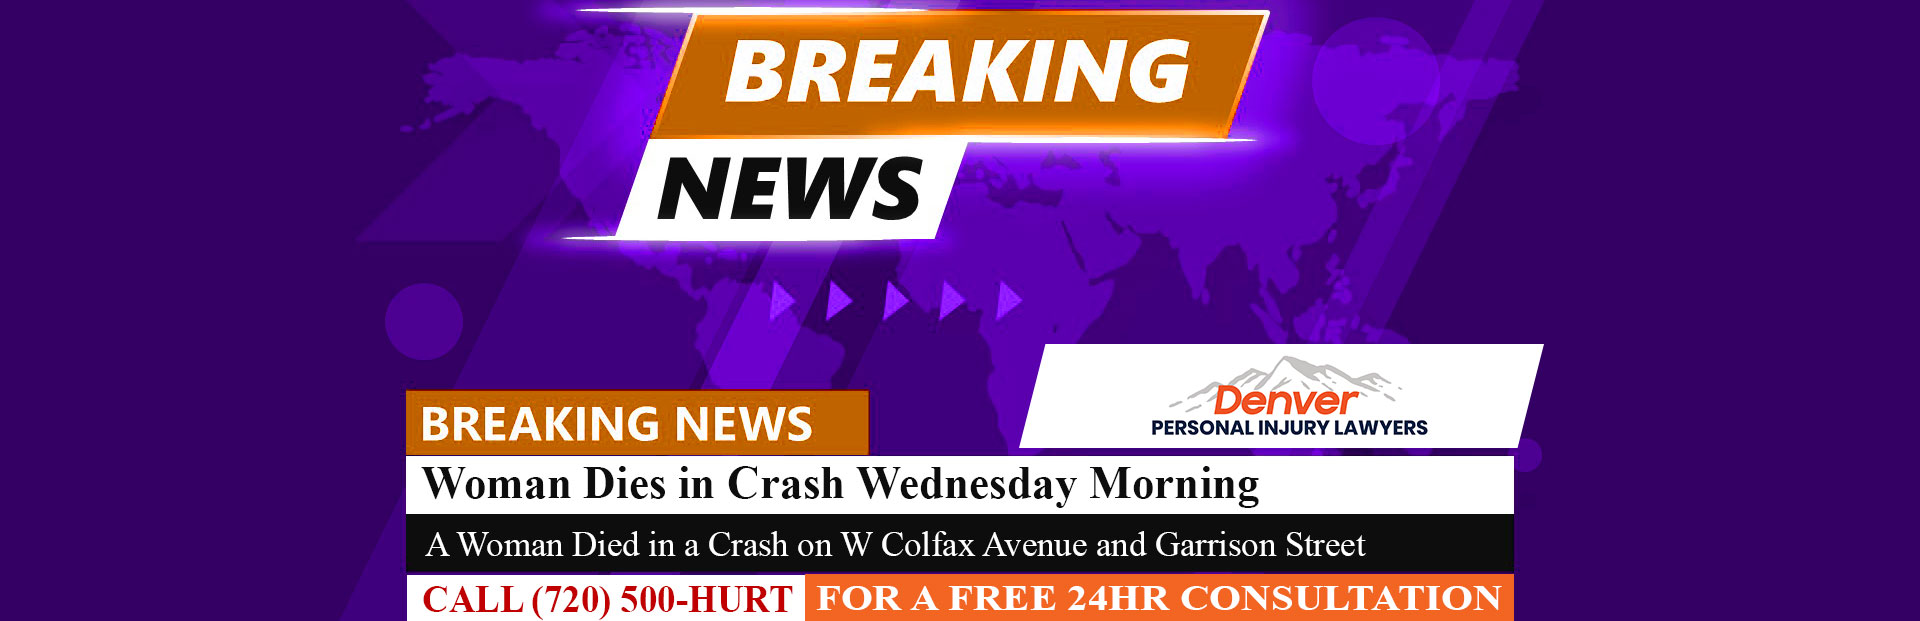 [06-05-24] Woman Dies in Crash on W Colfax Avenue and Garrison Street Wednesday Morning, 2 Others Hospitalized